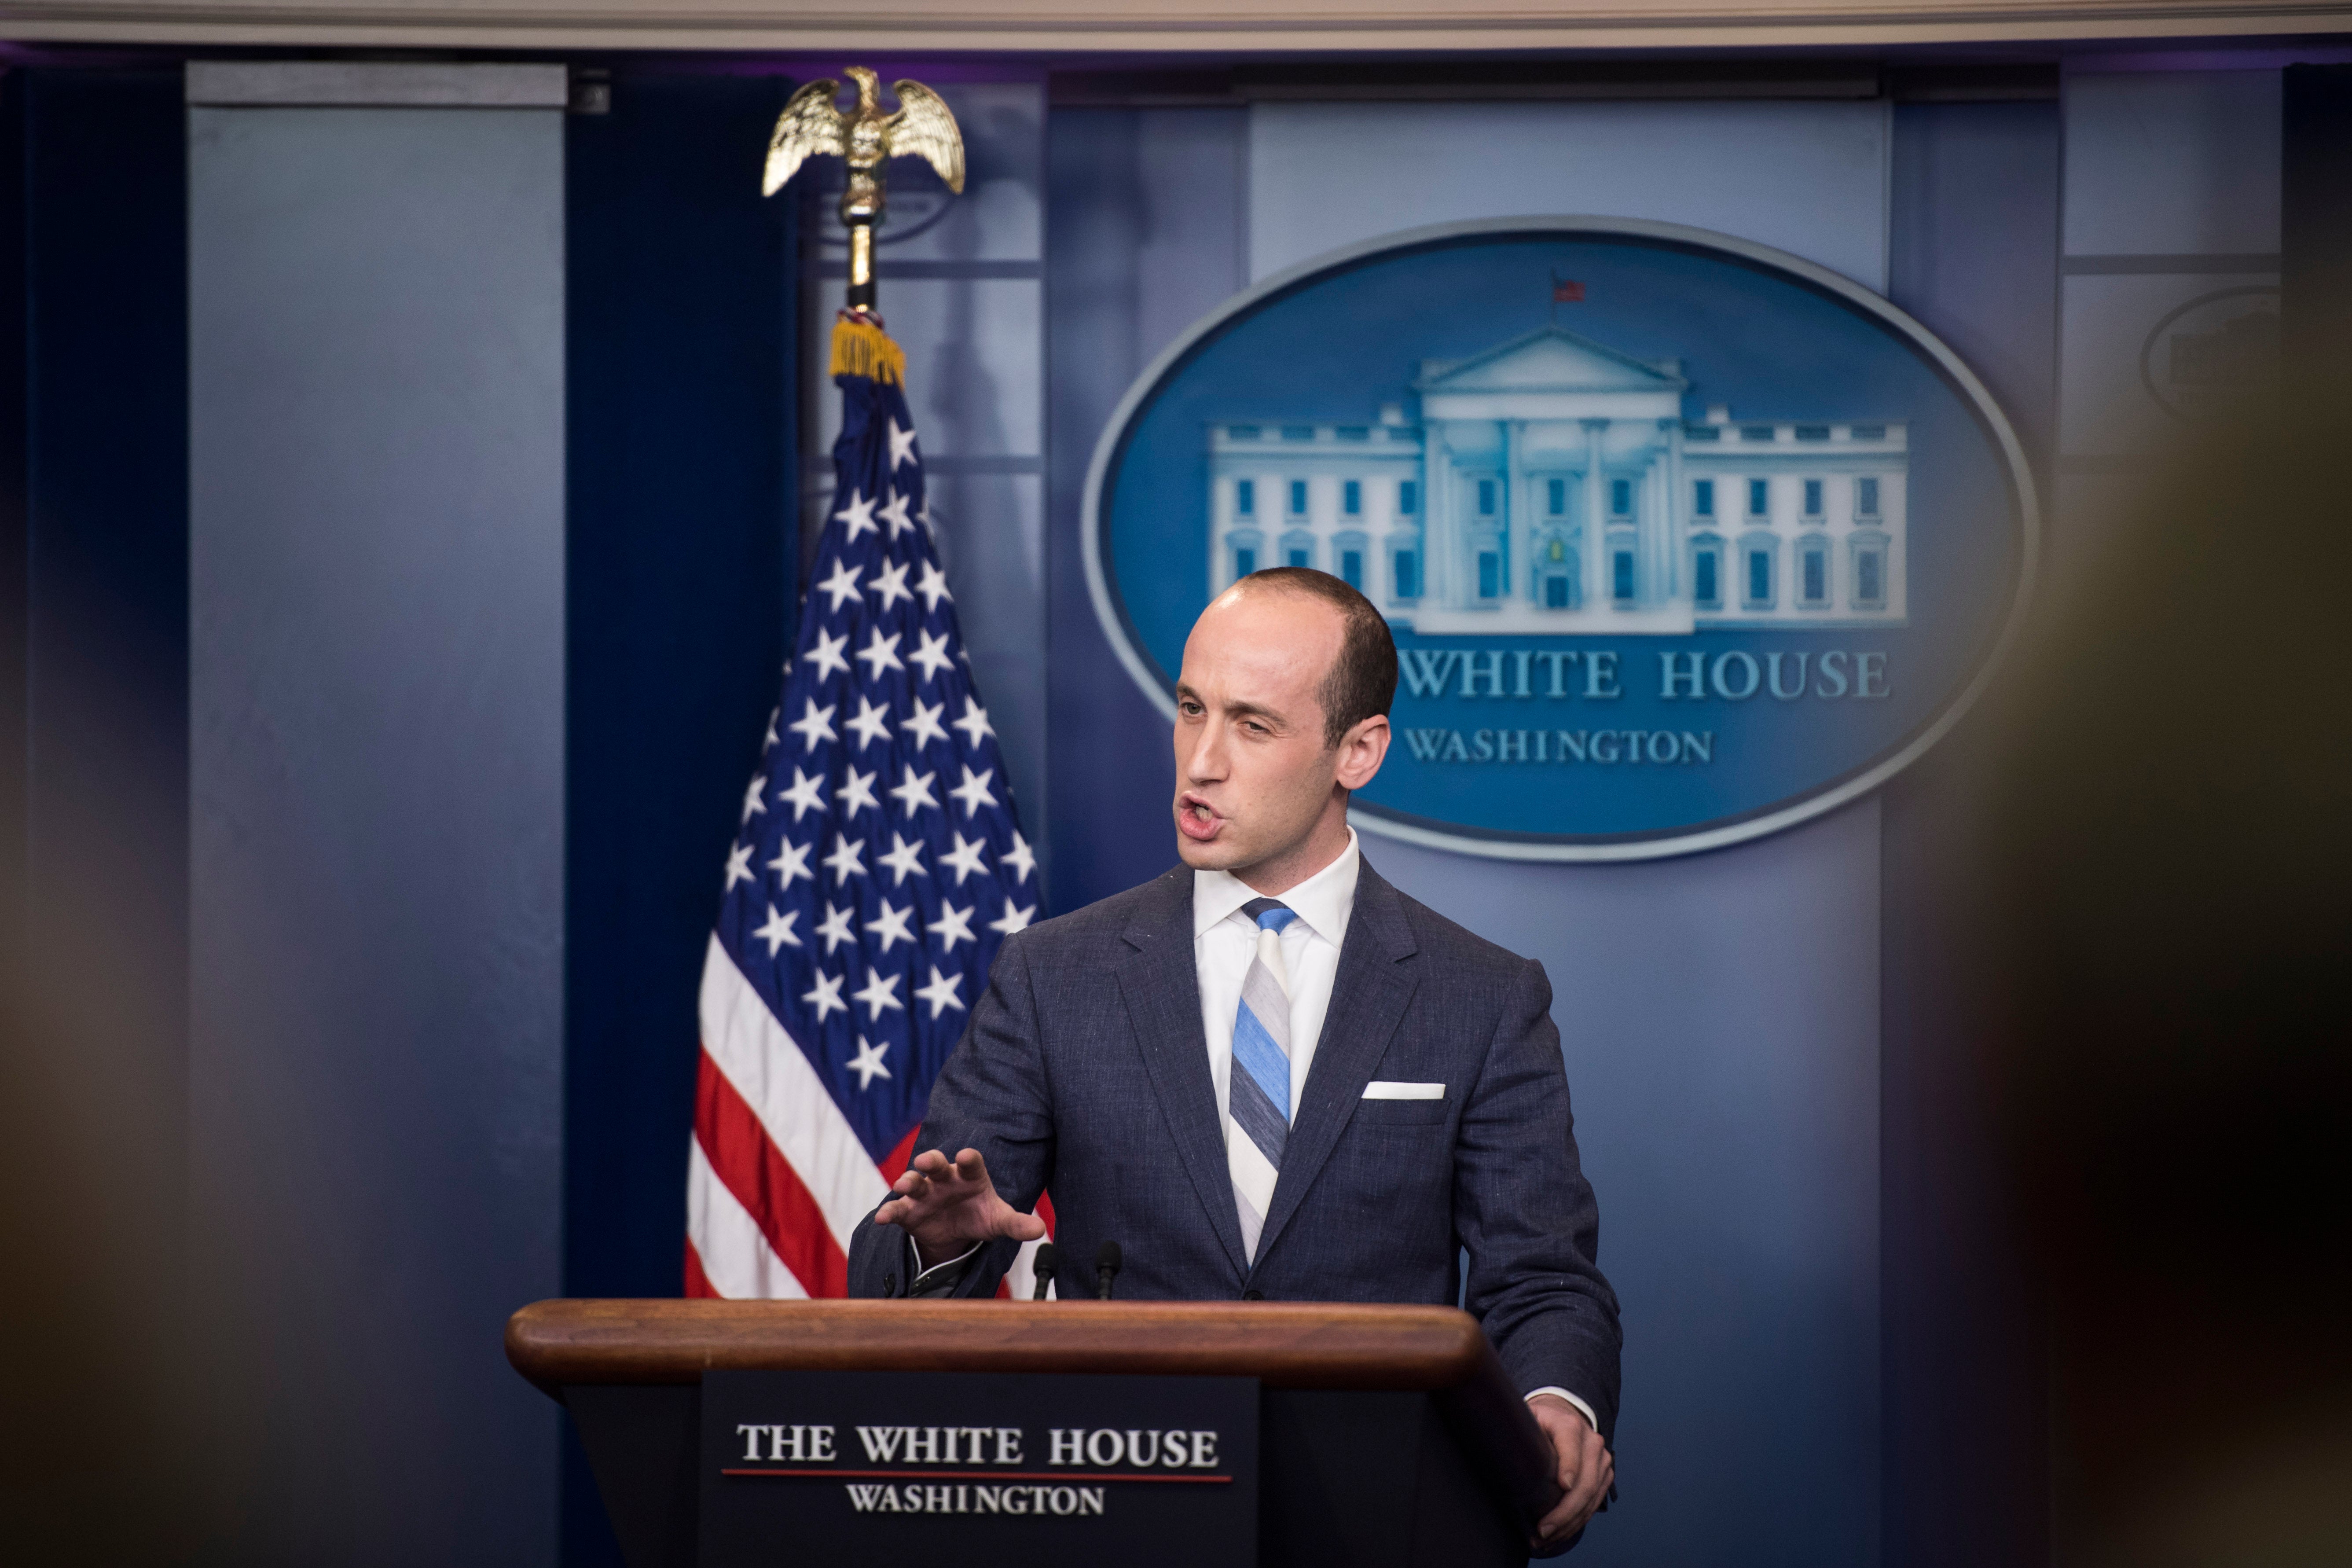 Known White Supremacist Stephen Miller Rumored To Be Writing Trump Speech On Race Relations